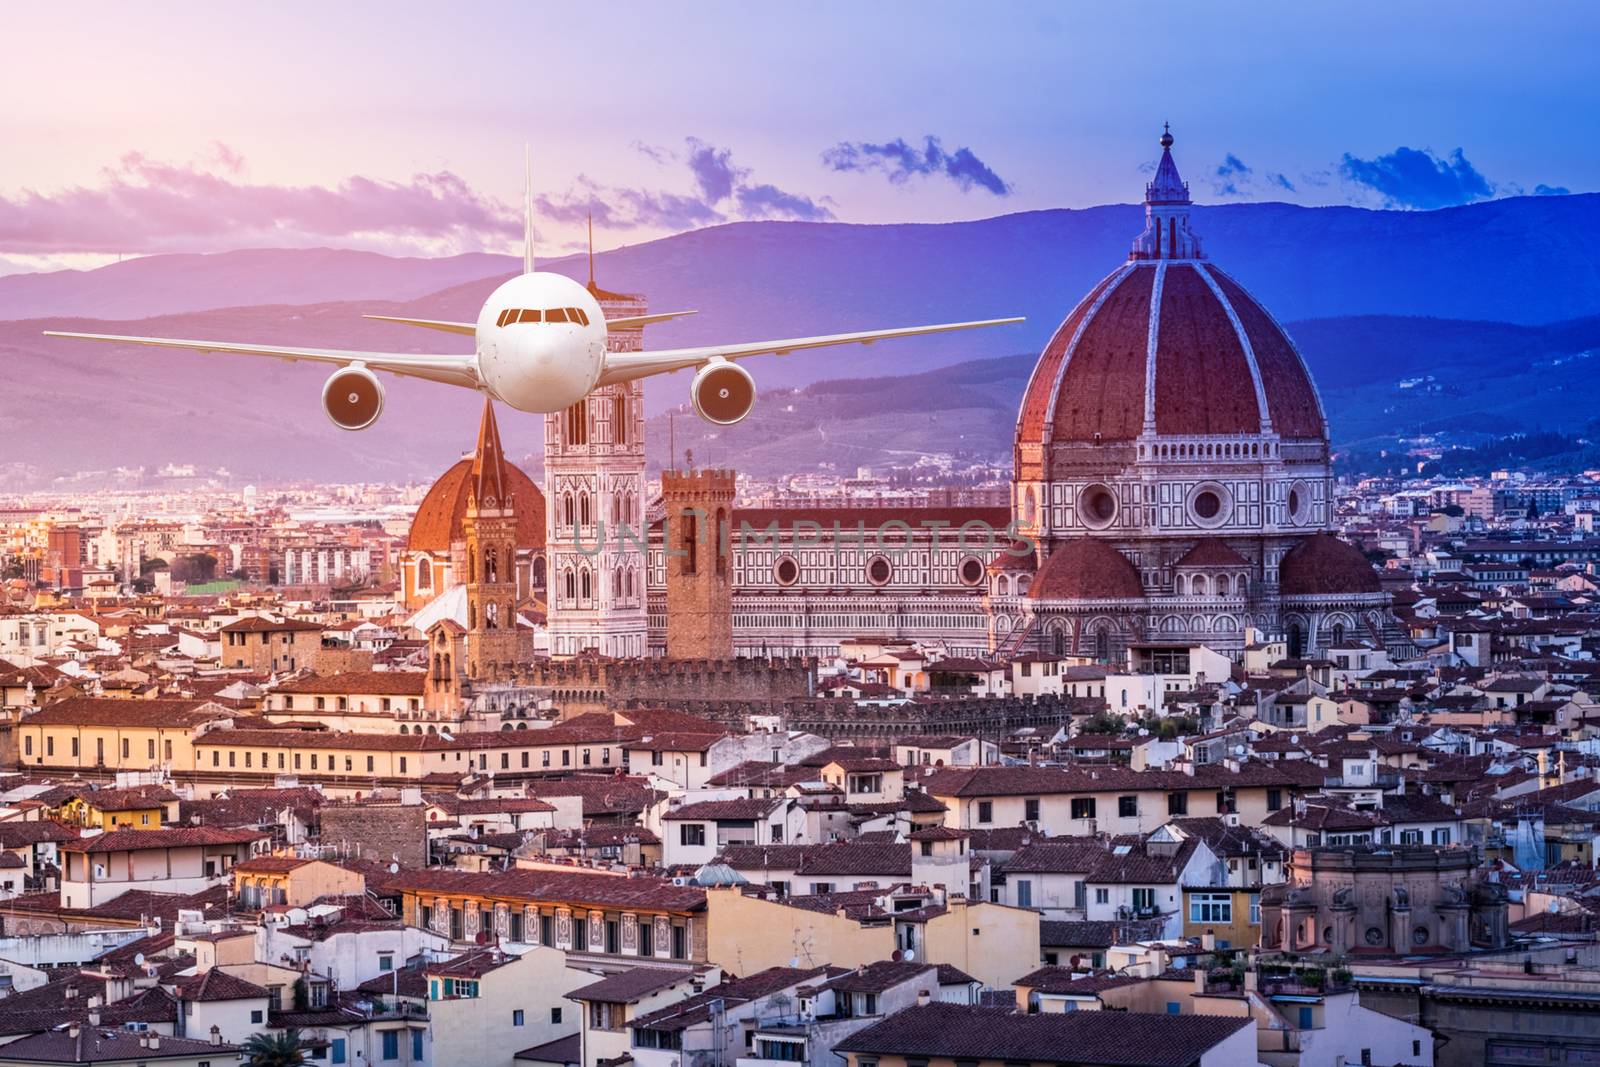 Front of real plane aircraft, on Florence Cathedral Santa Maria del Fiore in Sunrise at Florence, Italy background